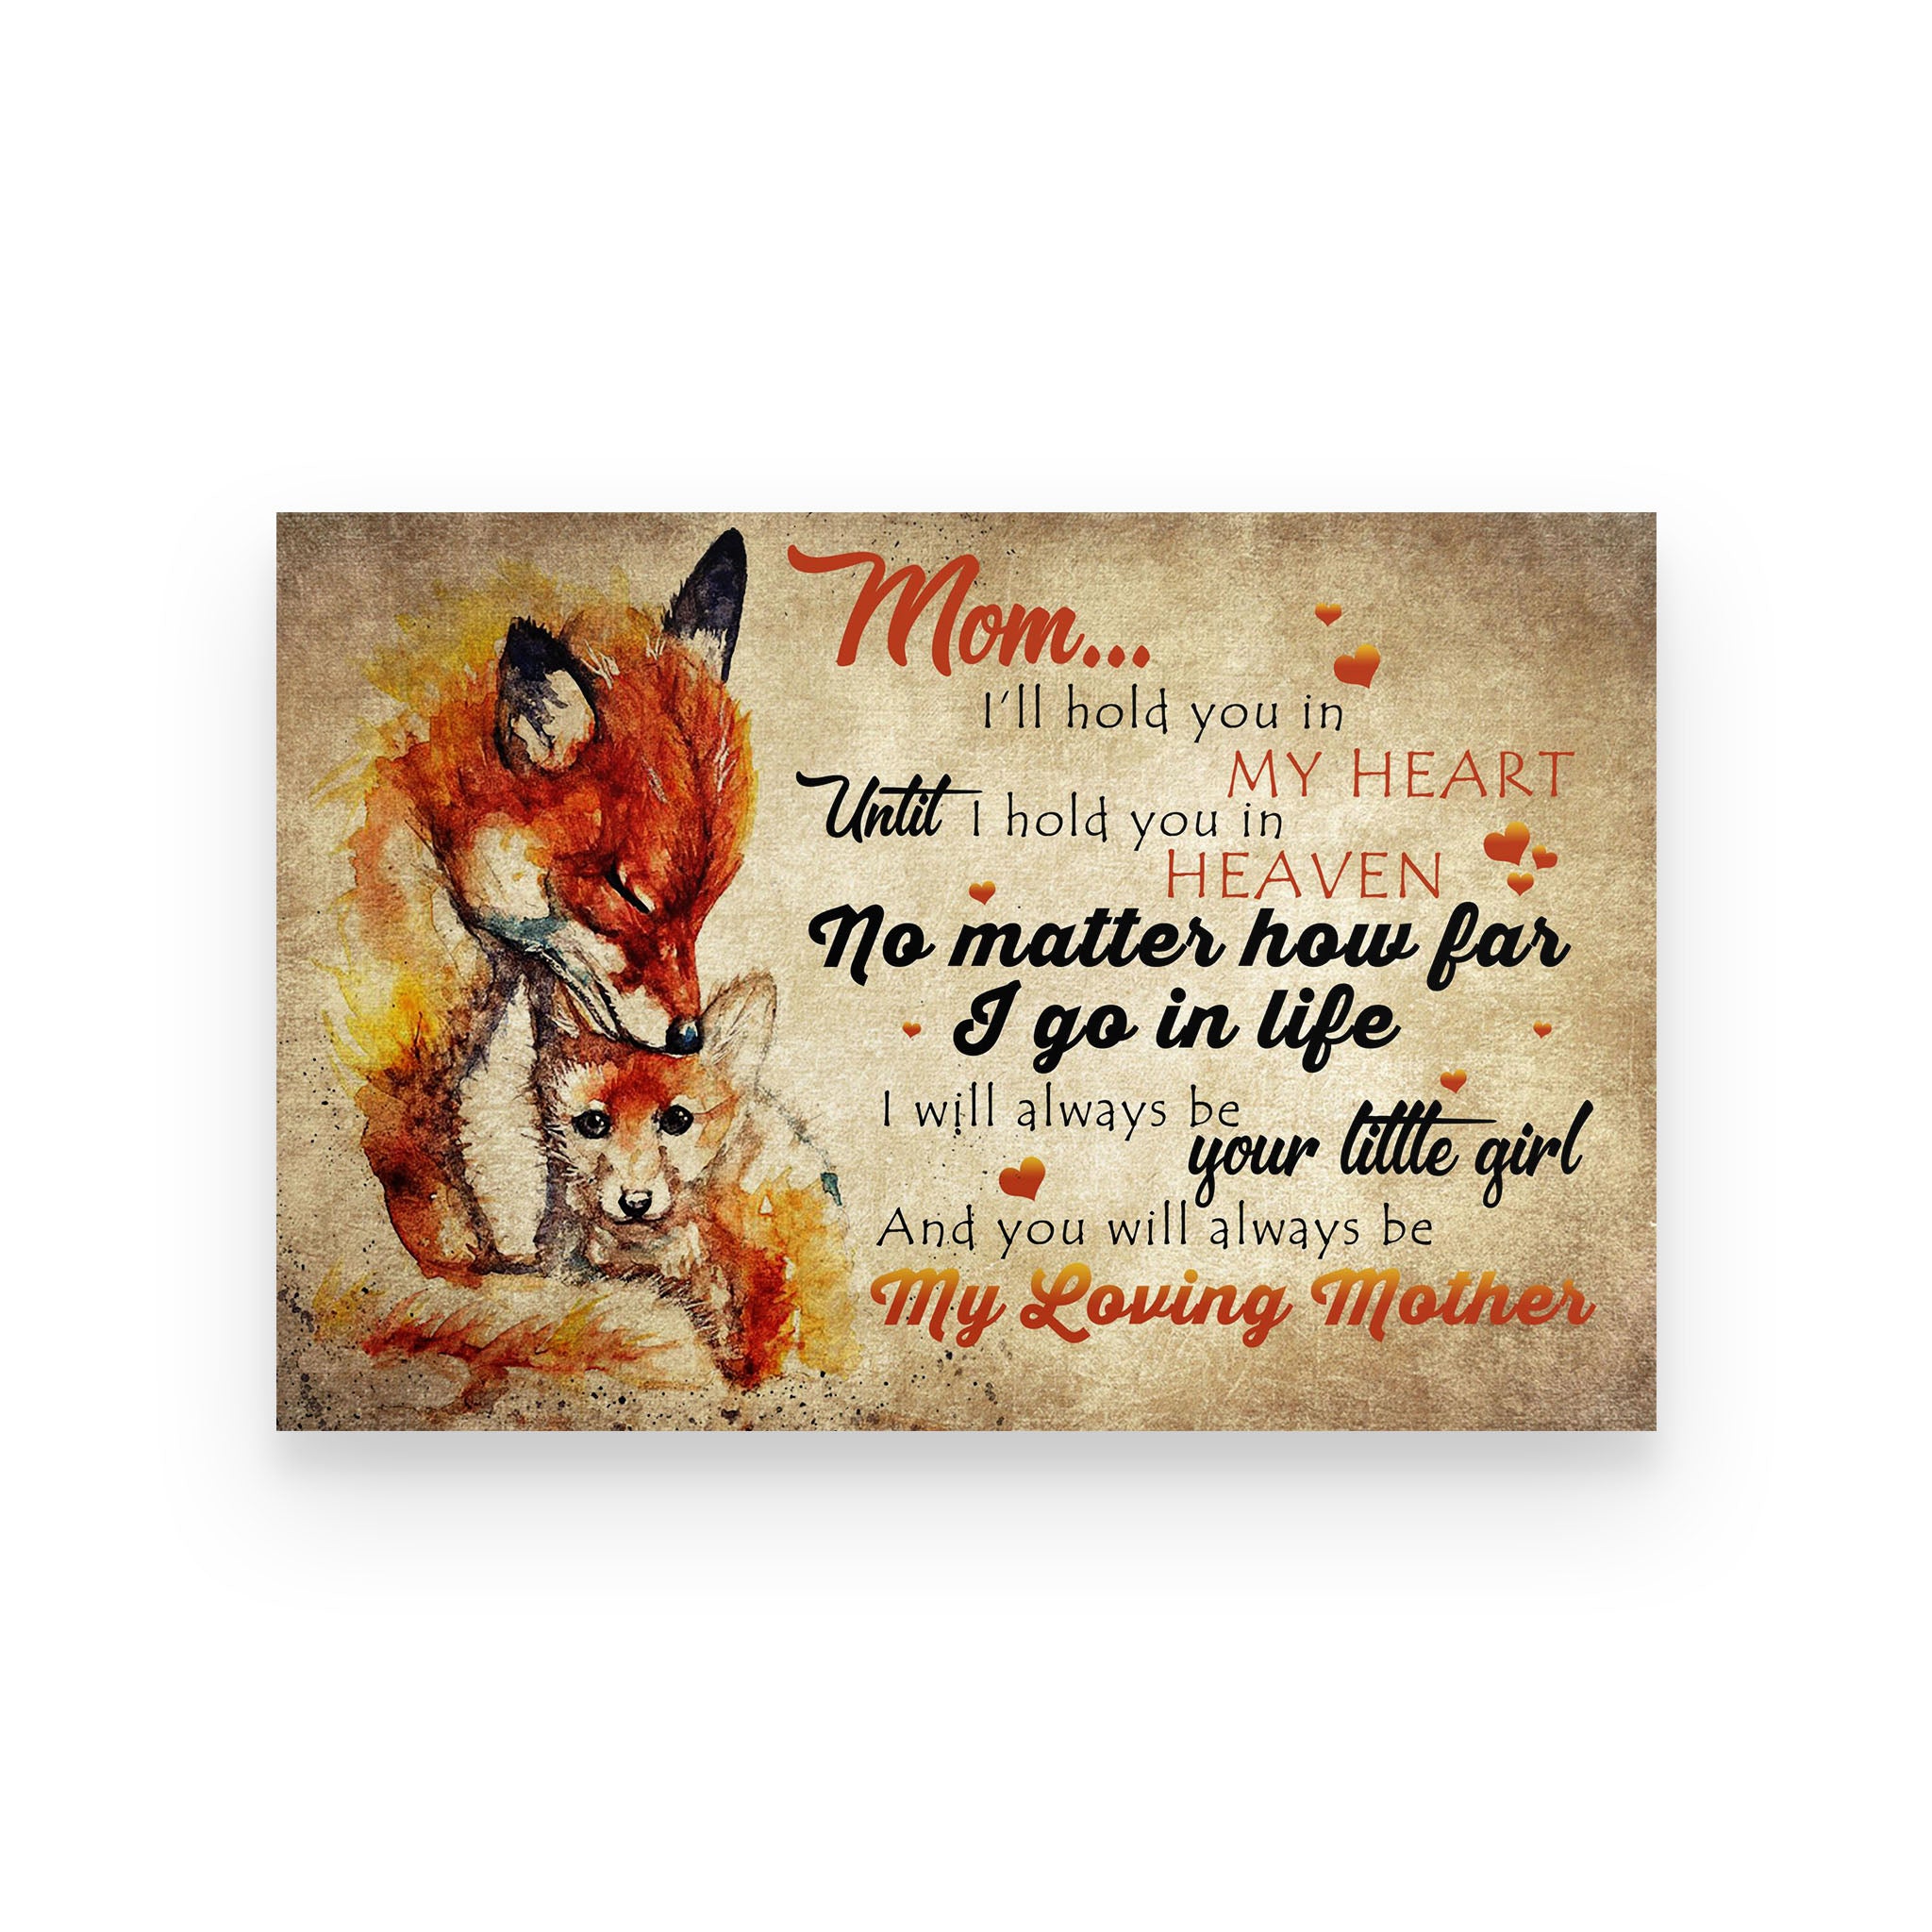 wolf poster  mom i’ll hold you in my heart until i hold you in heaven